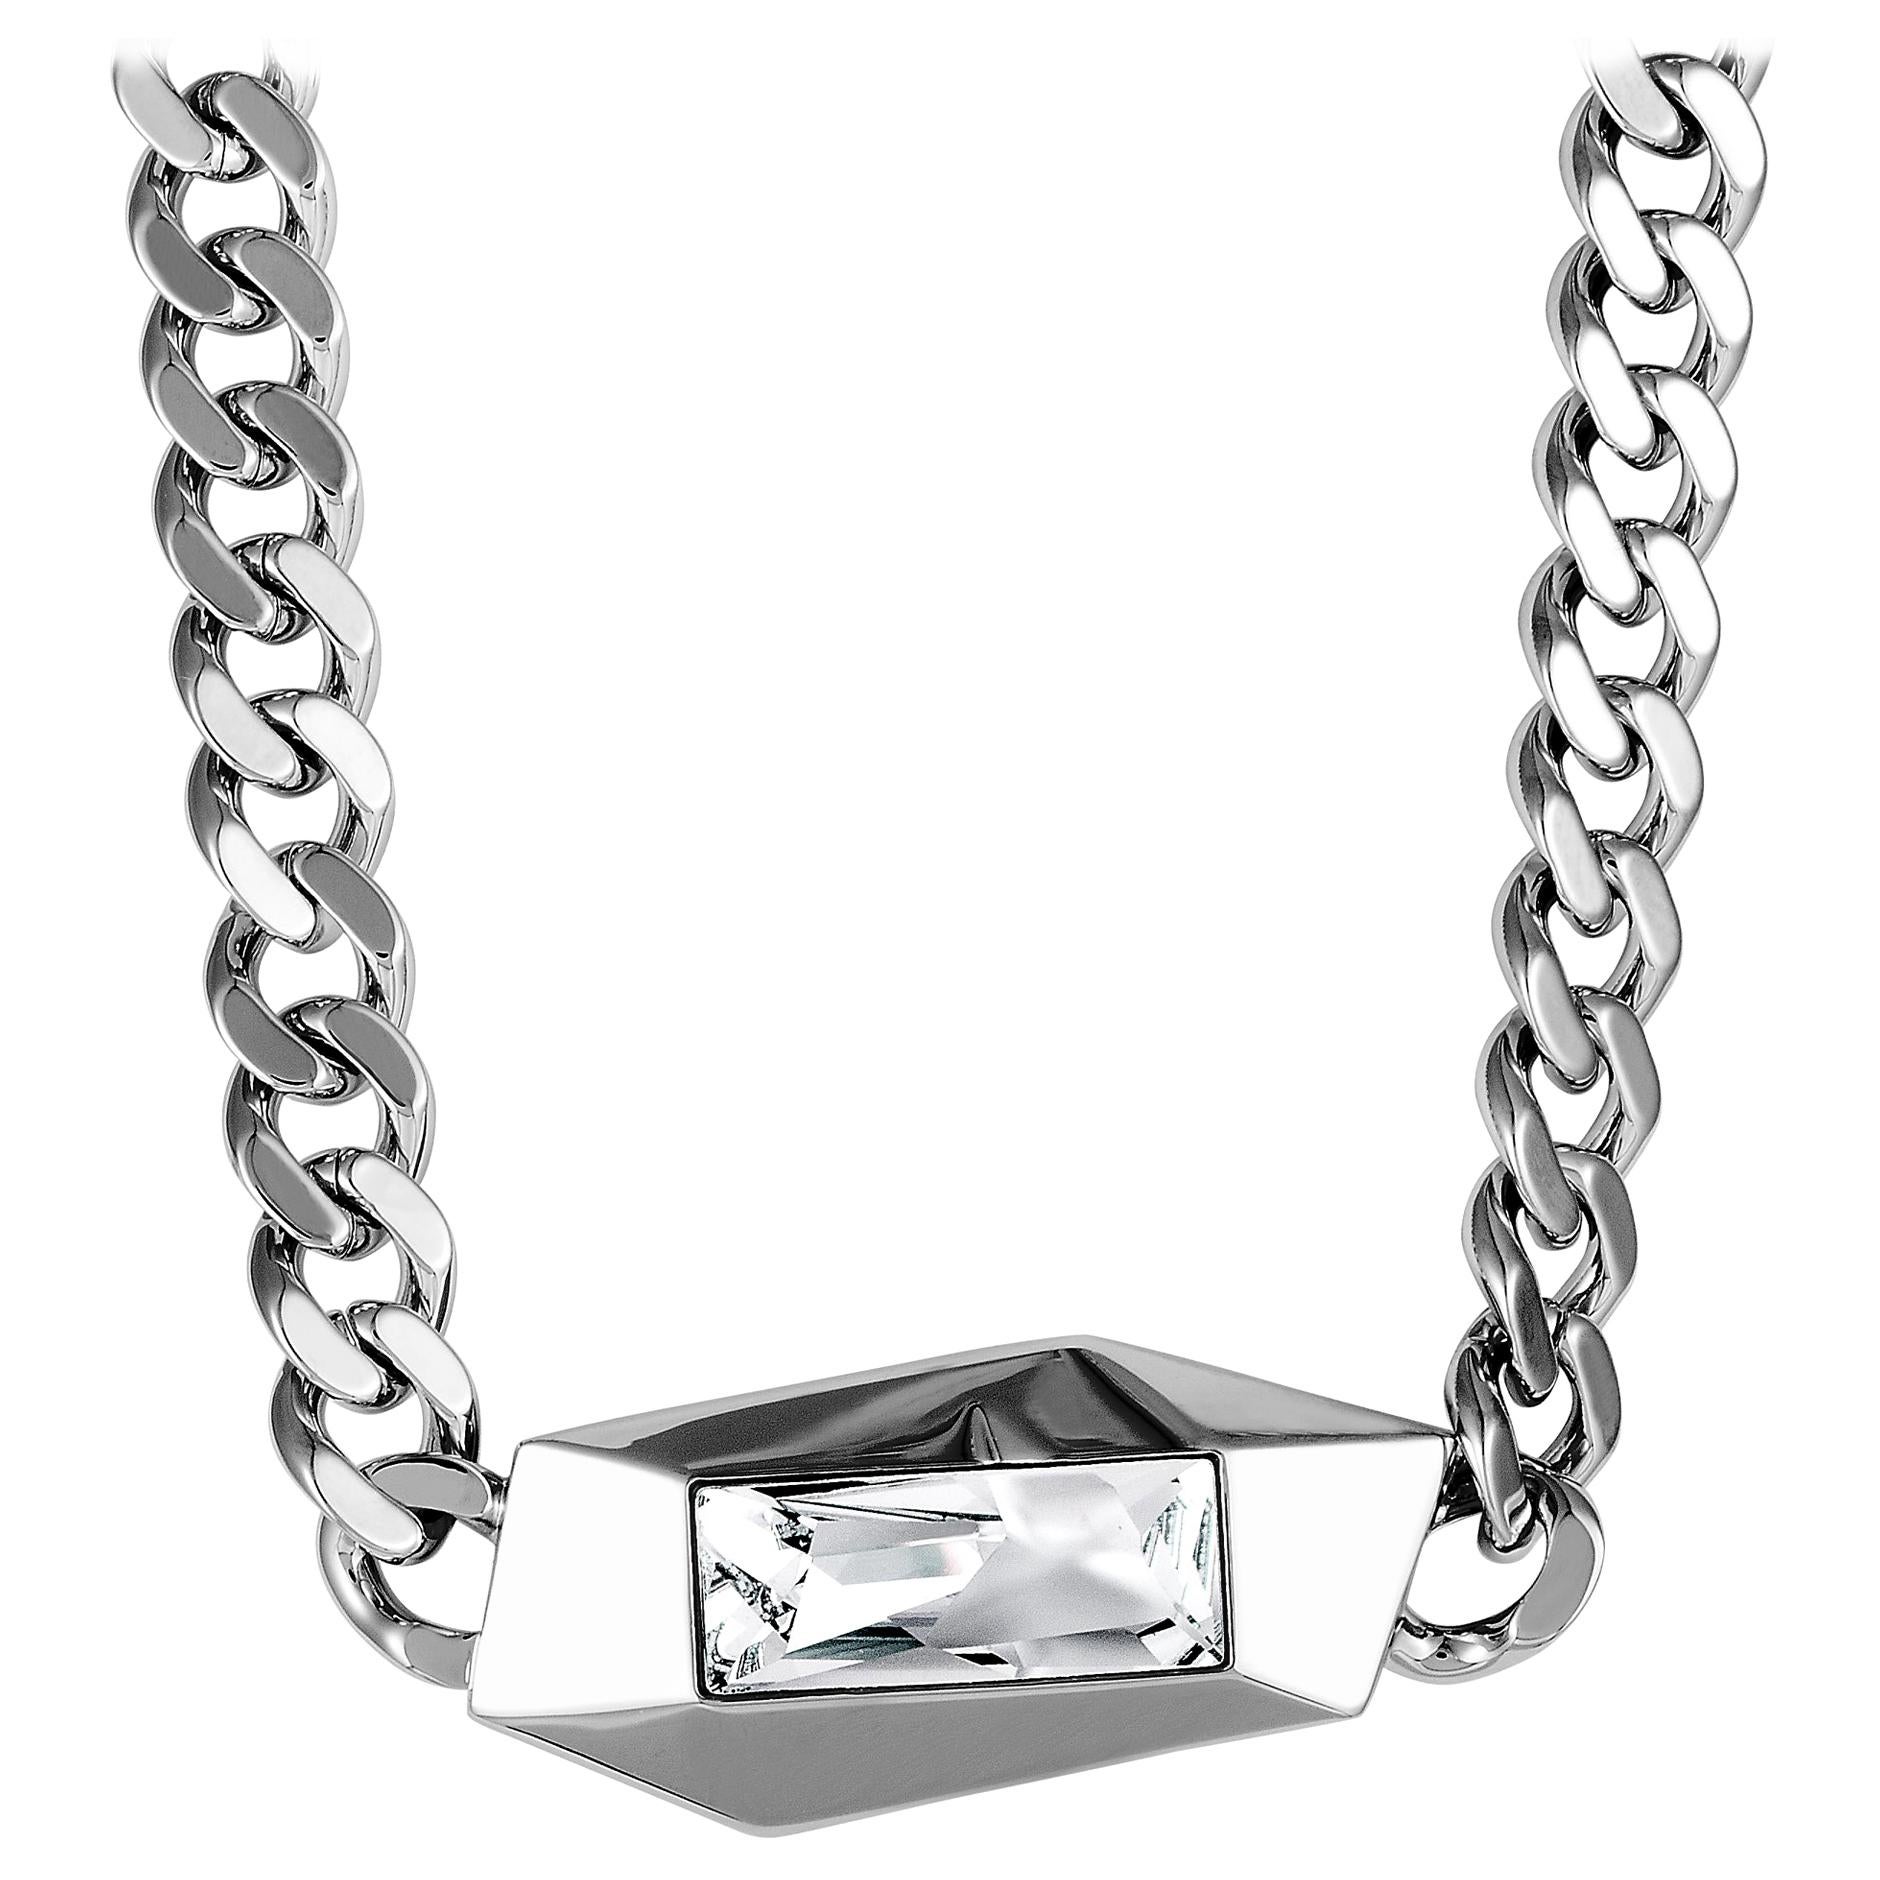 Swarovski AS Jean Paul Gaultier Reverse Crystal Chain Necklace at